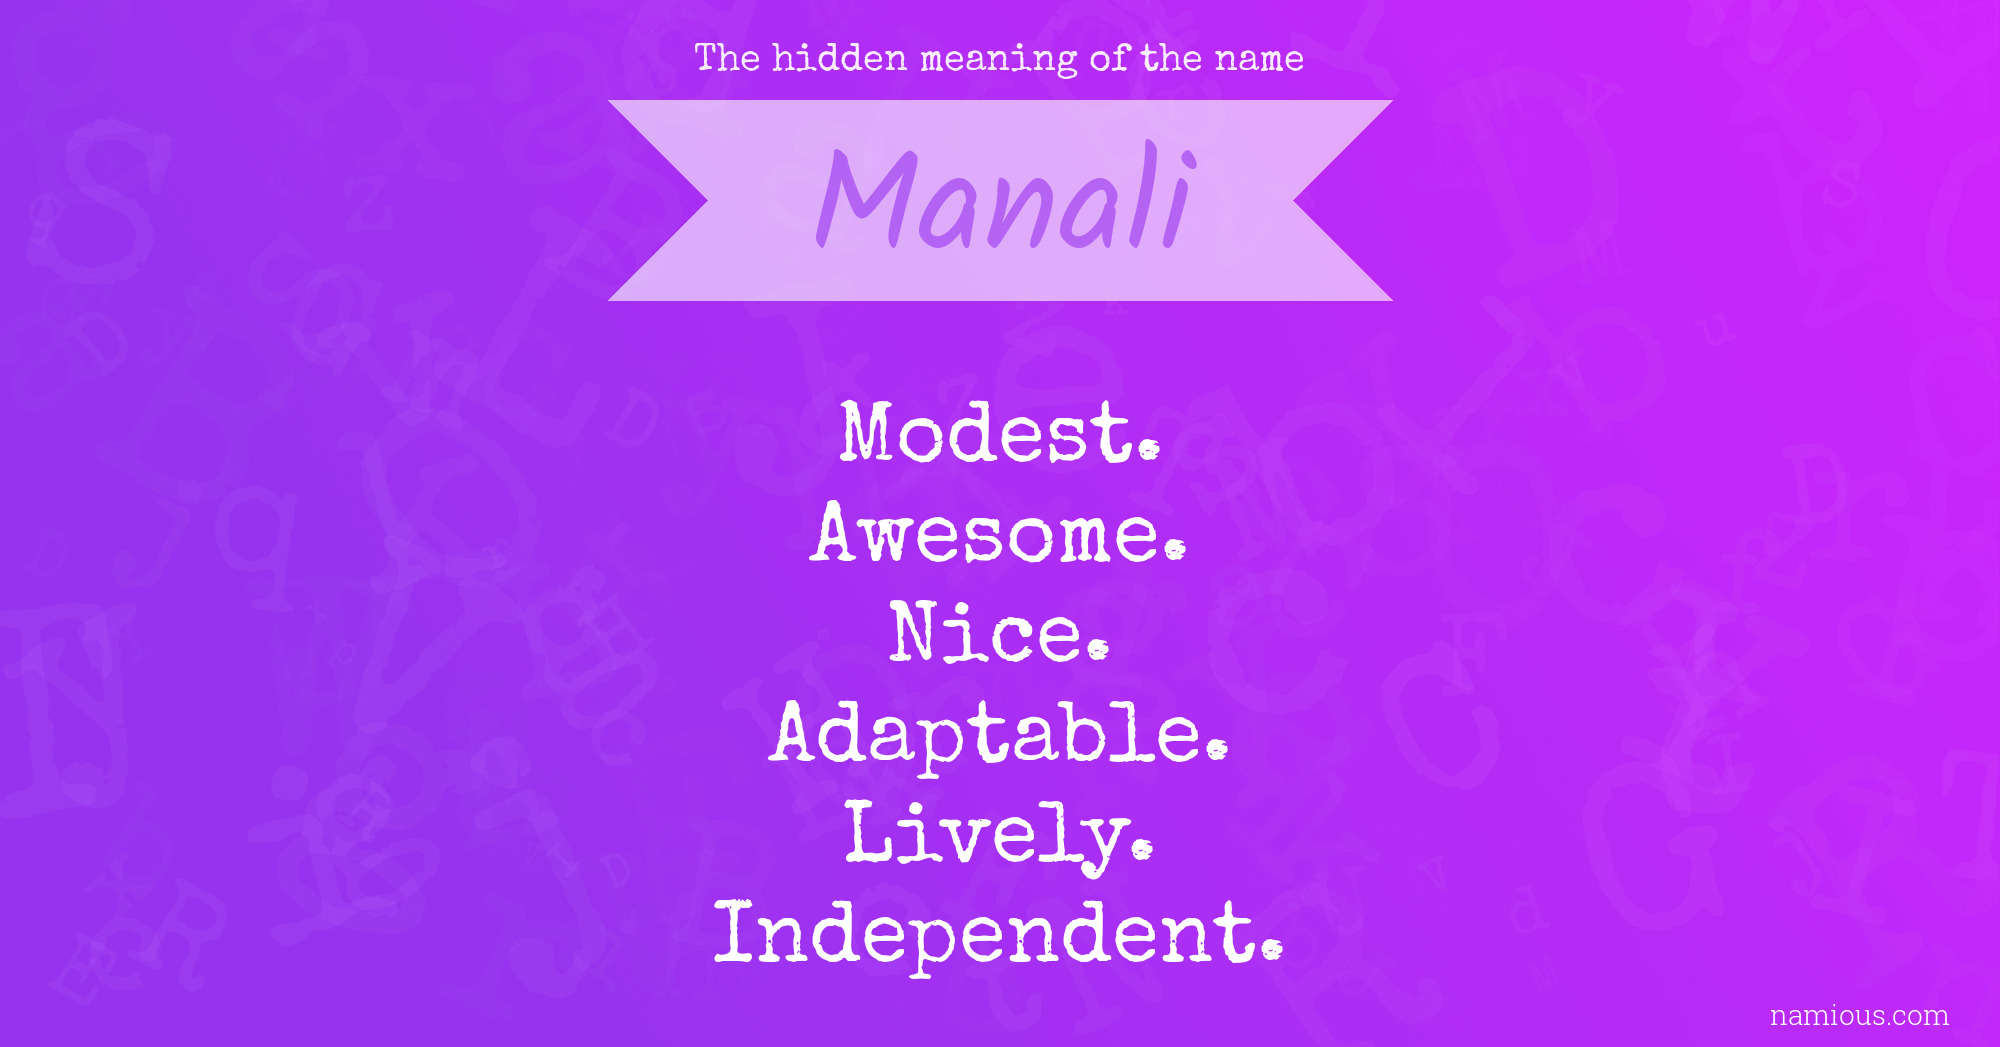 The hidden meaning of the name Manali